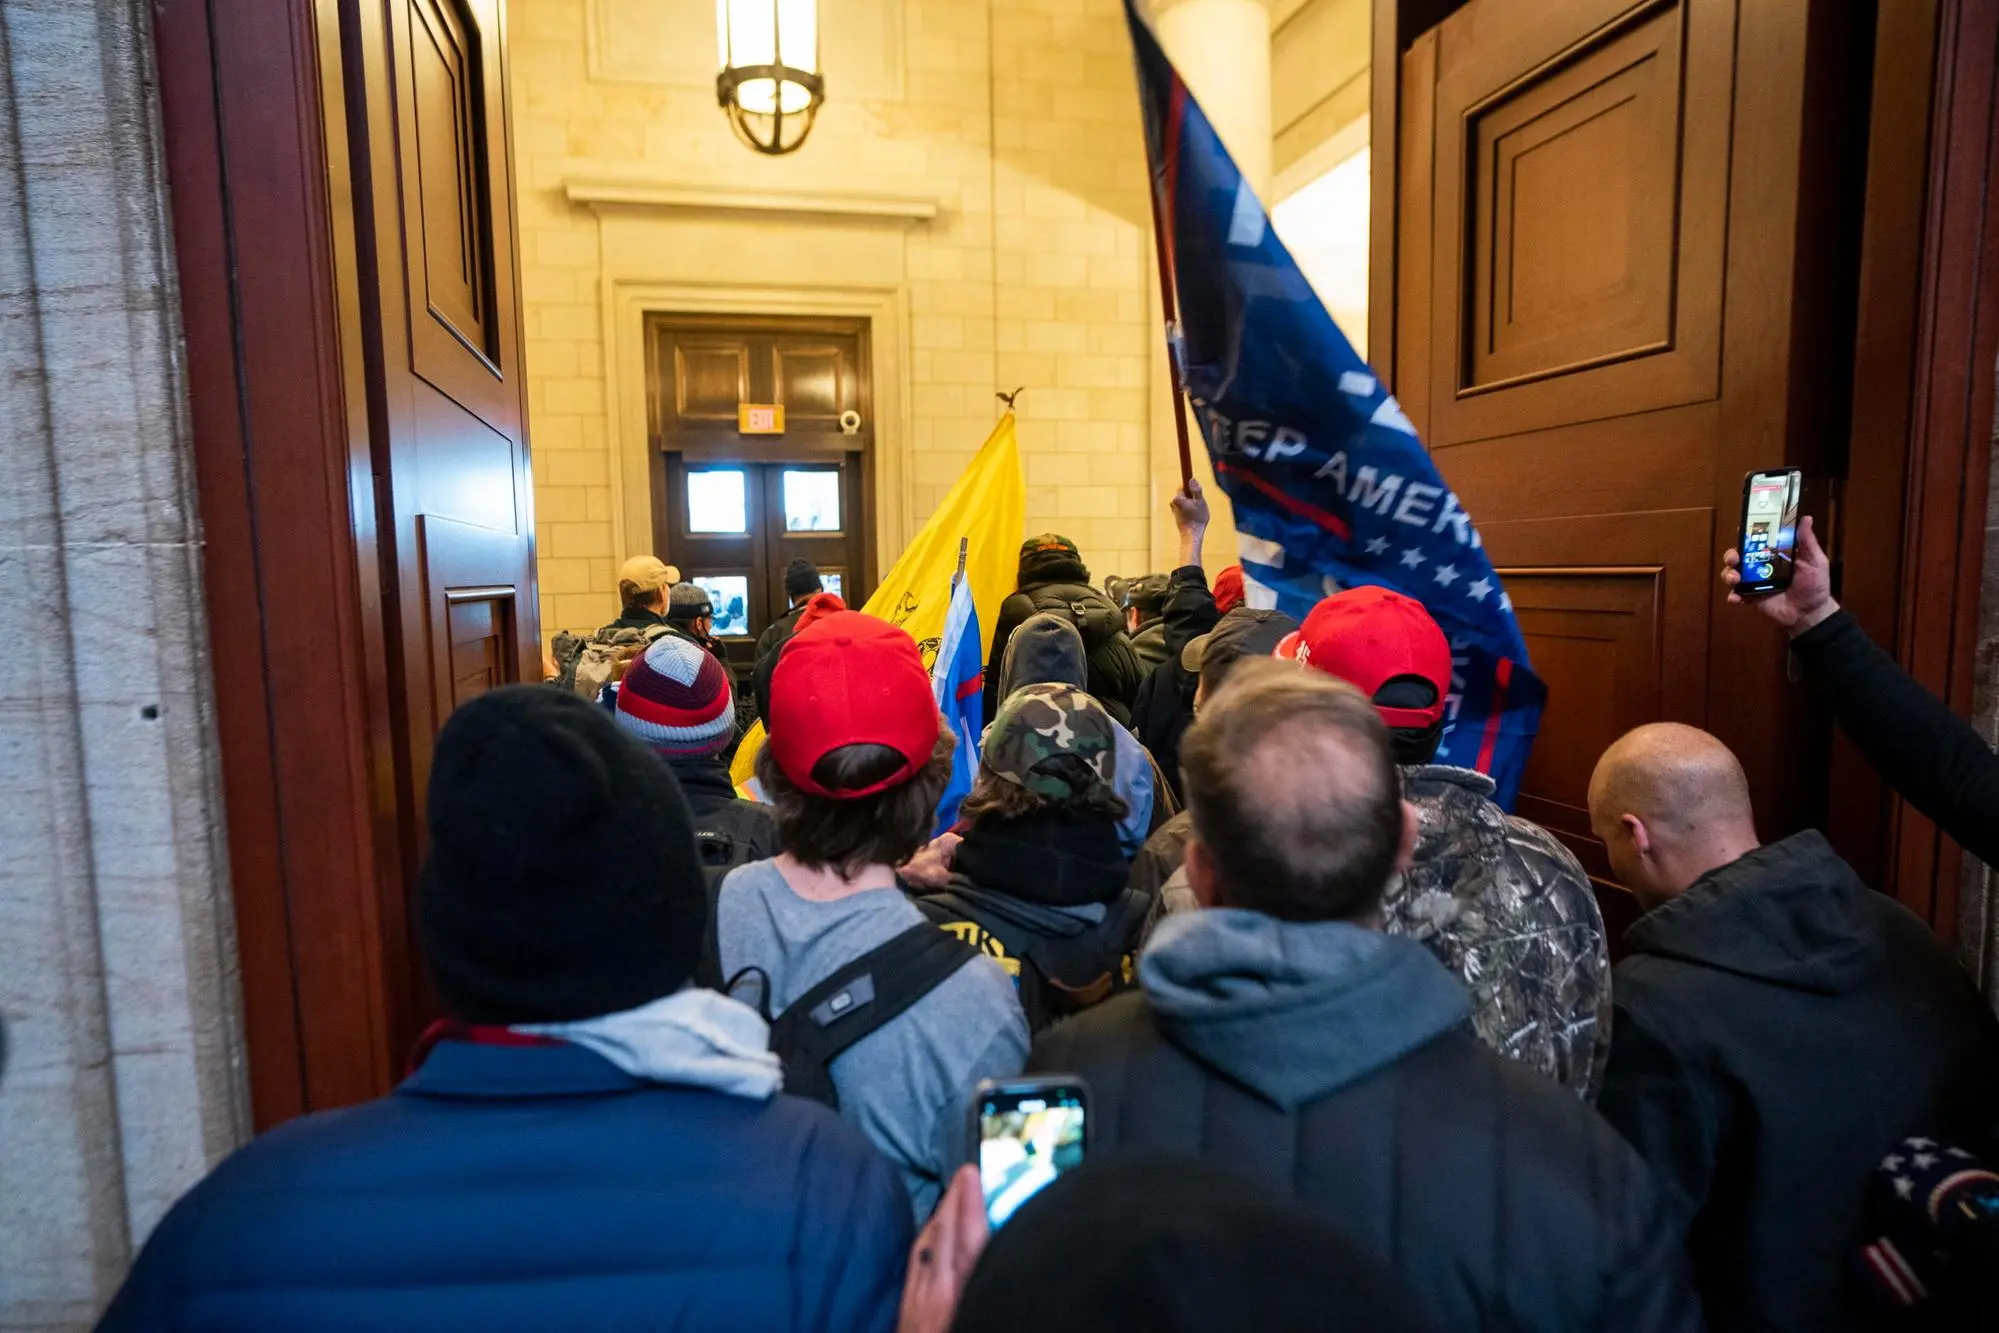 (fILE) - Supporters of US President Trump stand by the door of the Eastern front after they breached the US Capitol security in Washington, DC, USA, 06 January 2021 (reissued 03 January 2021). Following the November 2020 US presidential election, a tone set by supporters of defeated US President Donald Trump escalated further. Trump, who was refusing to concede the victory of Joe Biden, claiming voter fraud and rigged elections, told supporters and white nationalist extreme-right group Proud Boys to respectively 'Stop the Steal' and to 'stand back and stand by'. His social media accounts were suspended and the alt-right platform Parler gained in user numbers. On 06 January 2021, incumbent US vice president Pence was due to certify the Electoral College votes before Congress, the last step in the process before President-elect Biden was to be sworn in. In the morning, pro-Trump protesters had gathered for the so-called Save America March. Soon after Trump finished his speech at the Ellipse, the crowd marched to the Capitol. The attack had begun. Rioters broke into the Capitol building where the joint Congress session was being held. Lawmakers barricaded themselves inside the chambers and donned tear gas masks while rioters vandalized the building, some even occupying offices such as House Speaker Pelosi's. Eventually in the evening the building was cleared from insurrectionists, and the Congress chambers reconvened their session, confirming Joe Biden as the winner of the 2020 US presidential election. In the aftermath, more than 600 people were charged with federal crimes in connection to the insurgency, and close Trump aides such as Steve Bannon, Mark Meadows and Roger Stone were subpoenaed by the House select committee investigating the attack. Trump himself was acquitted by the Senate in his second impeachment trial, this time for "inciting an insurrection". ANSA/JIM LO SCALZO ATTENTION: This Image is part of a PHOTO SET *** Local